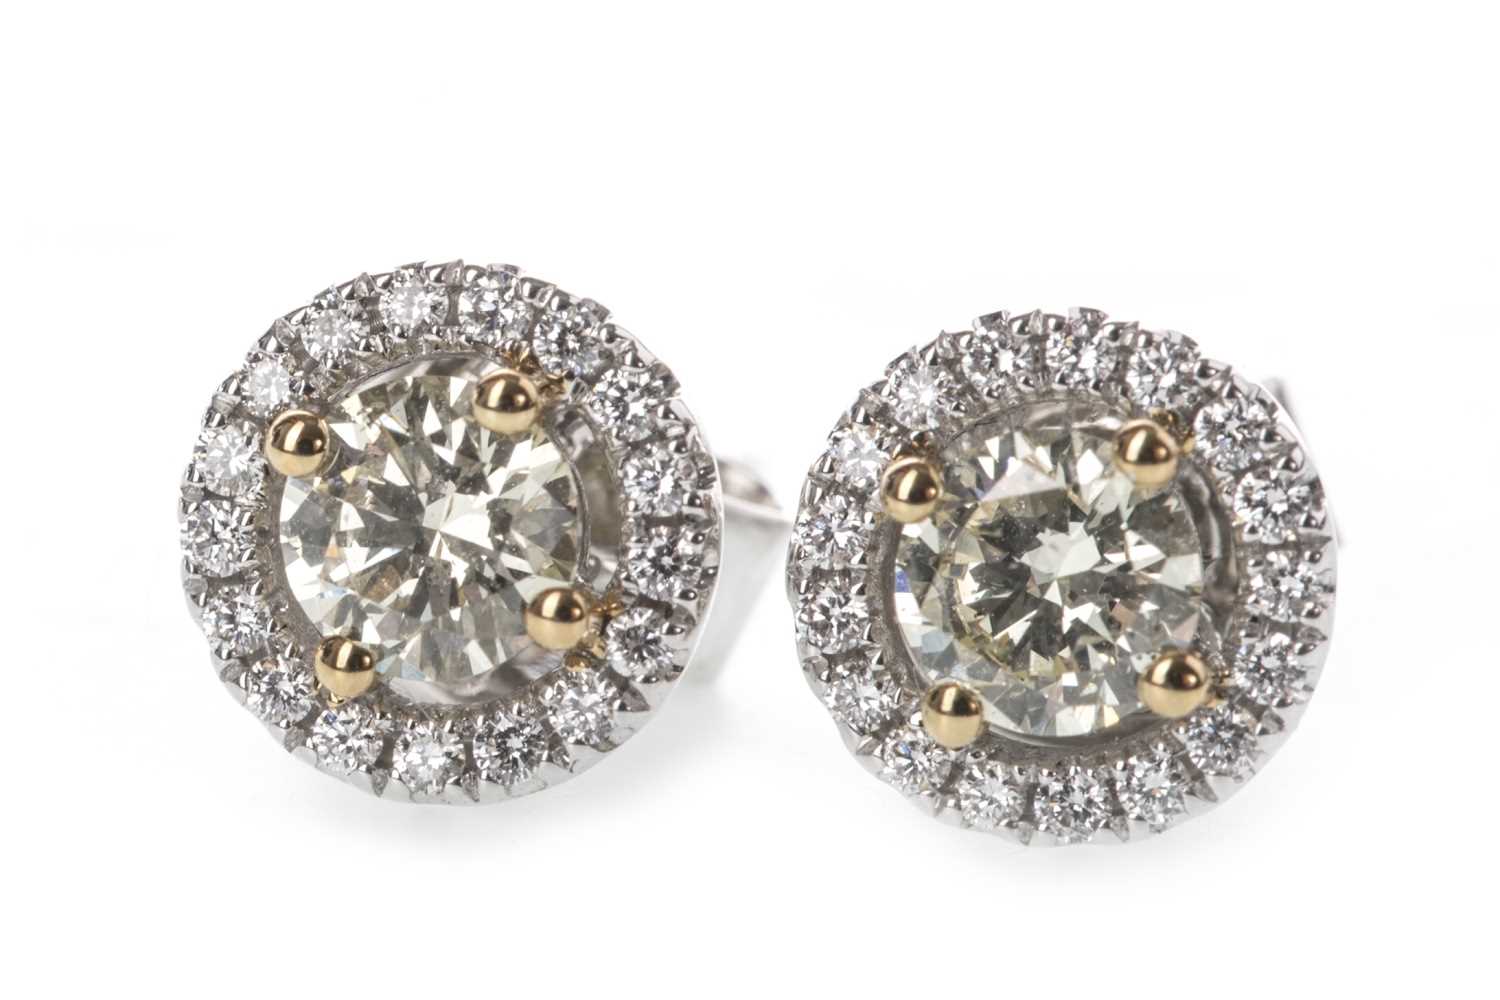 Lot 912 - A PAIR OF YELLOW AND WHITE DIAMOND EARRINGS